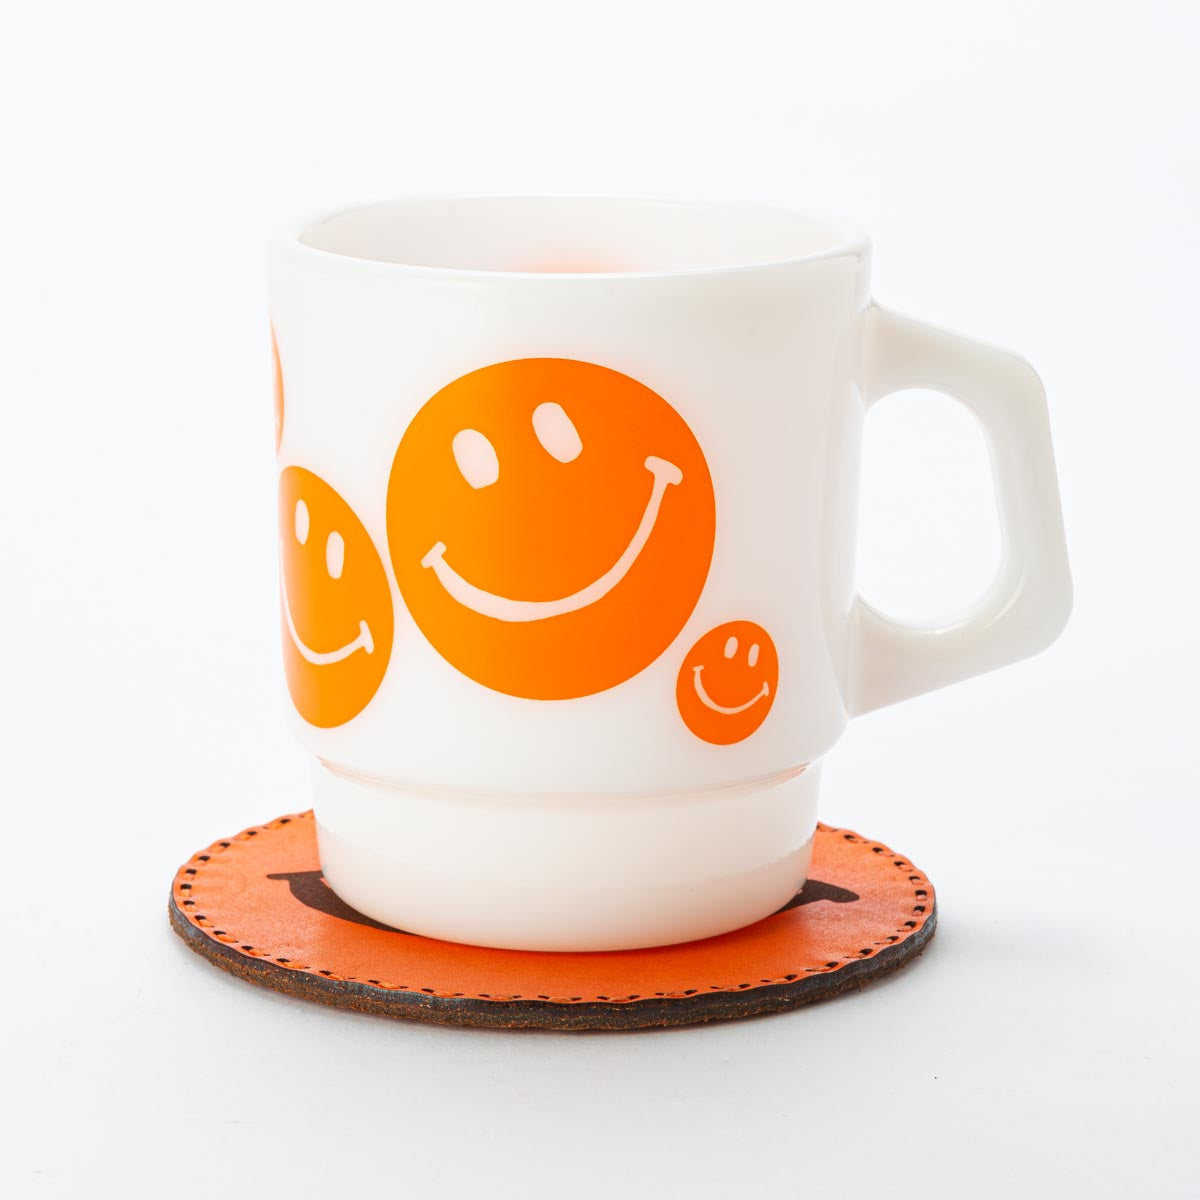 Fire-King レザーコースター SMILEY FACE オレンジ by OJAGA DESIGN